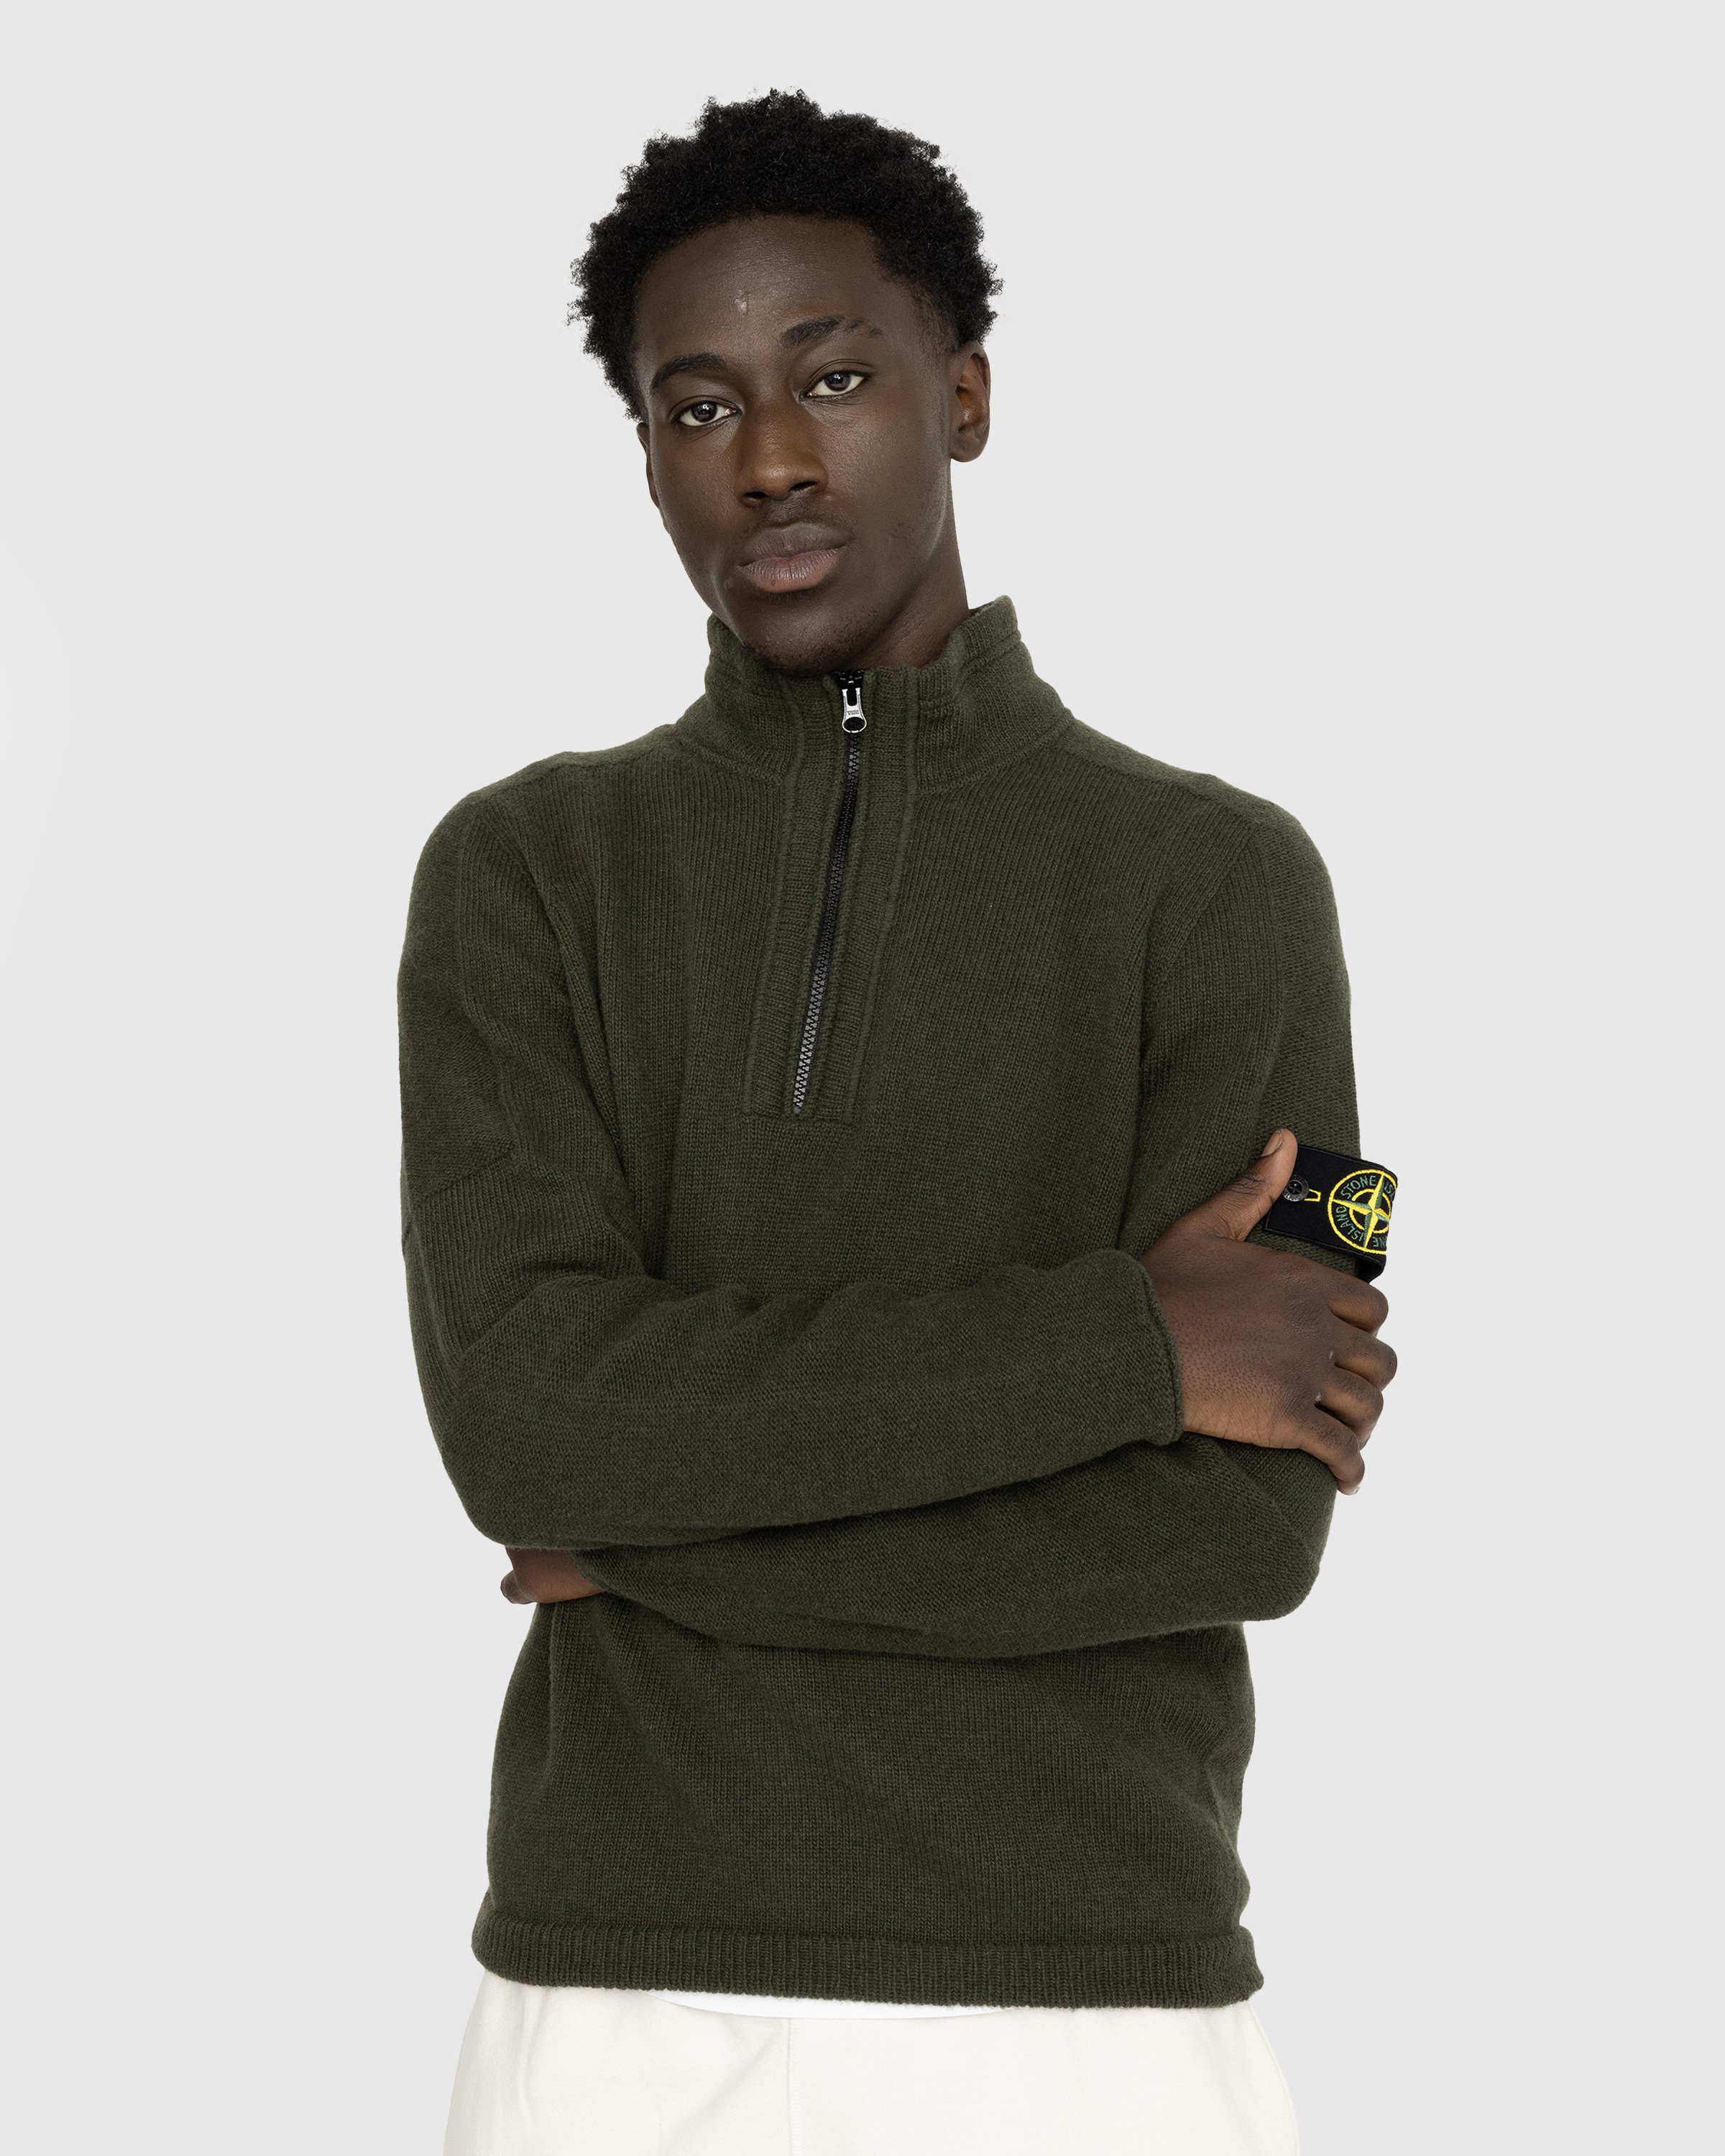 Stone Island - Lambswool Half-Zip Knit Olive - Clothing - Green - Image 2